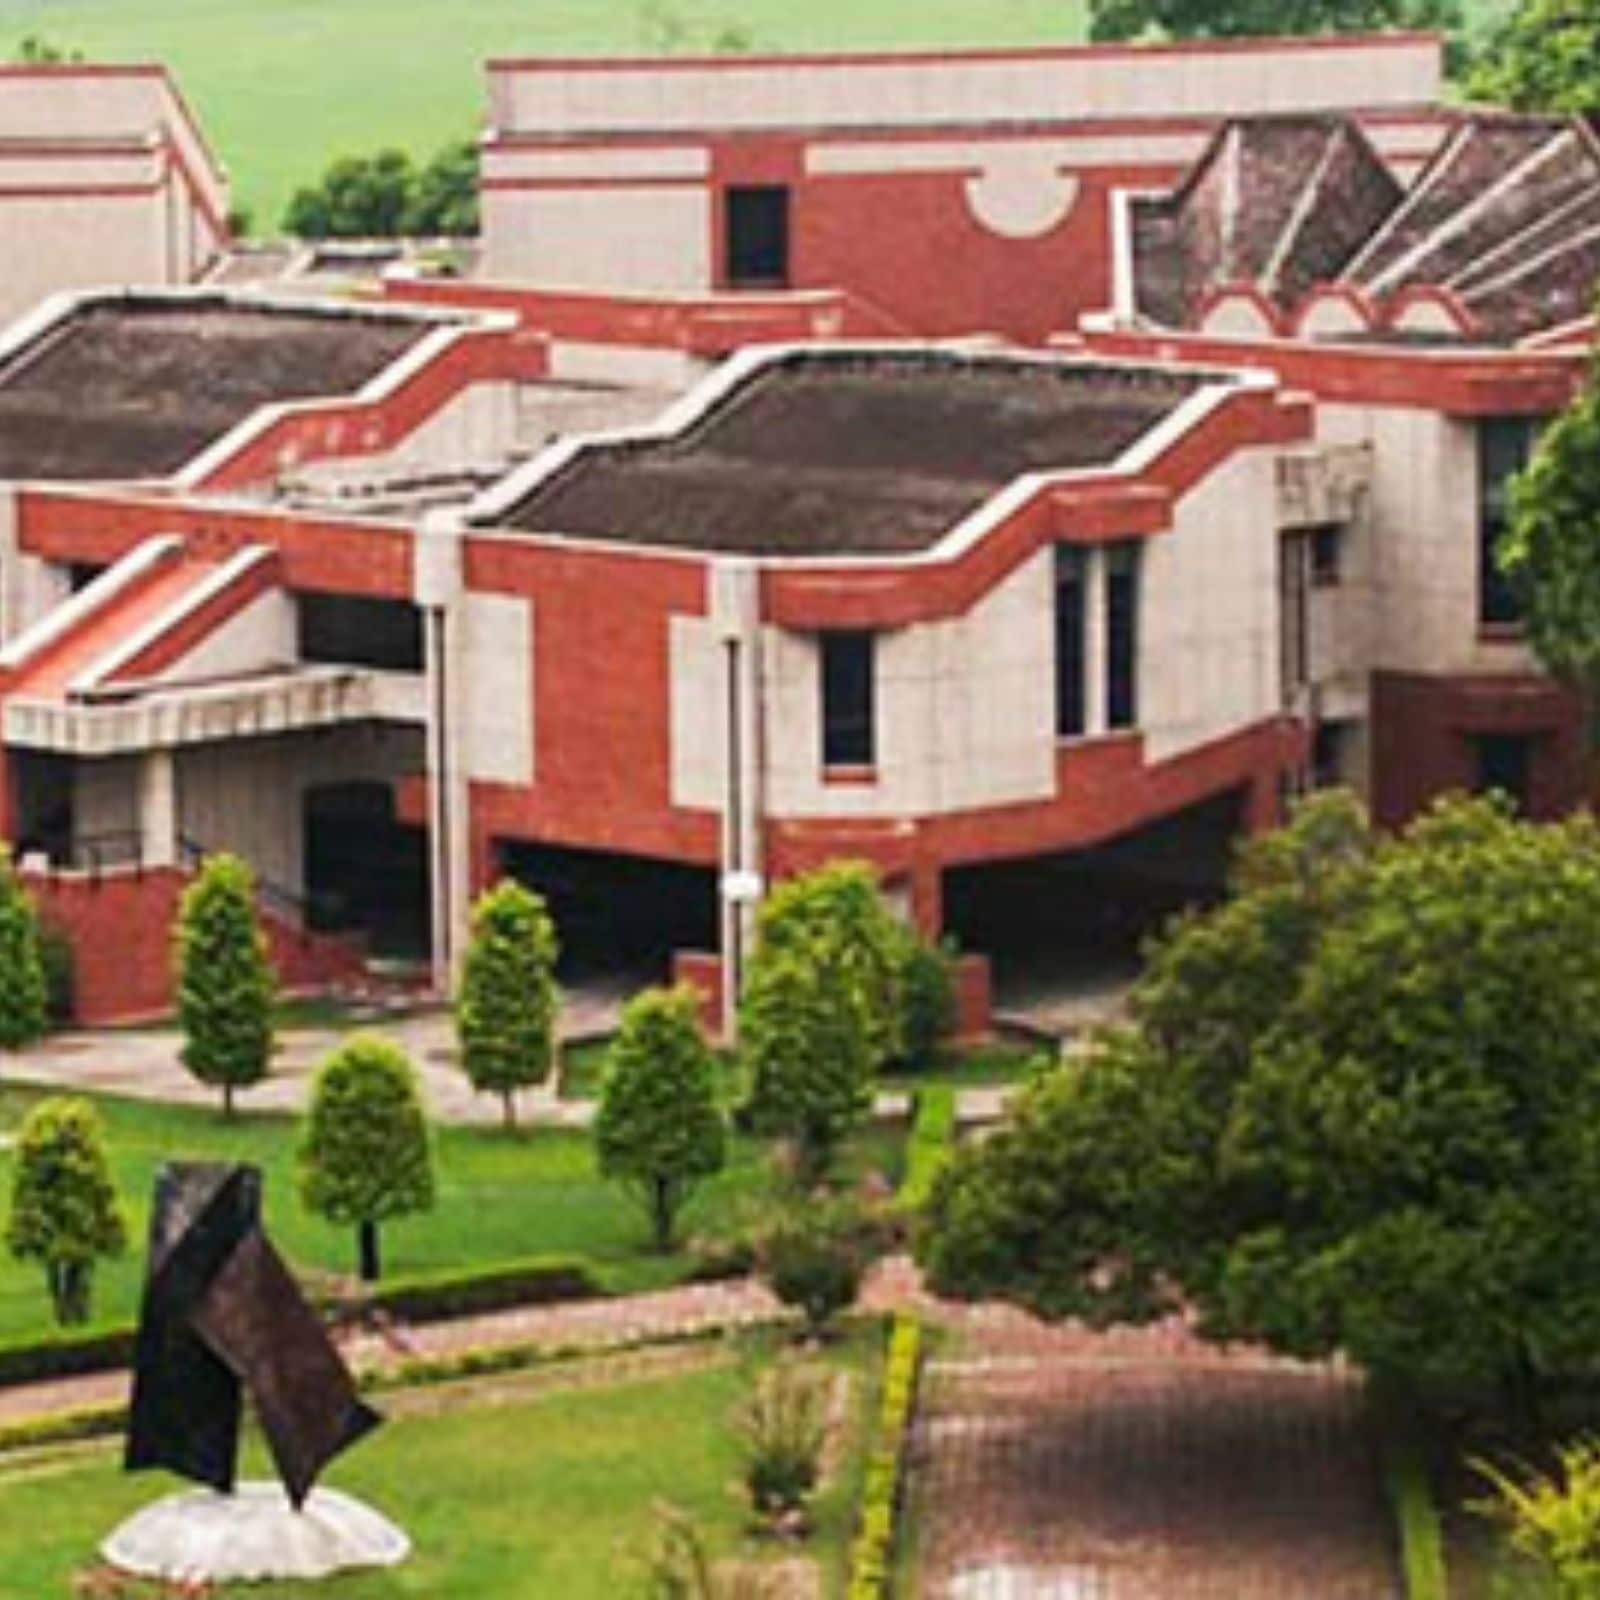 IIT Kanpur, eMasters in Business Finance